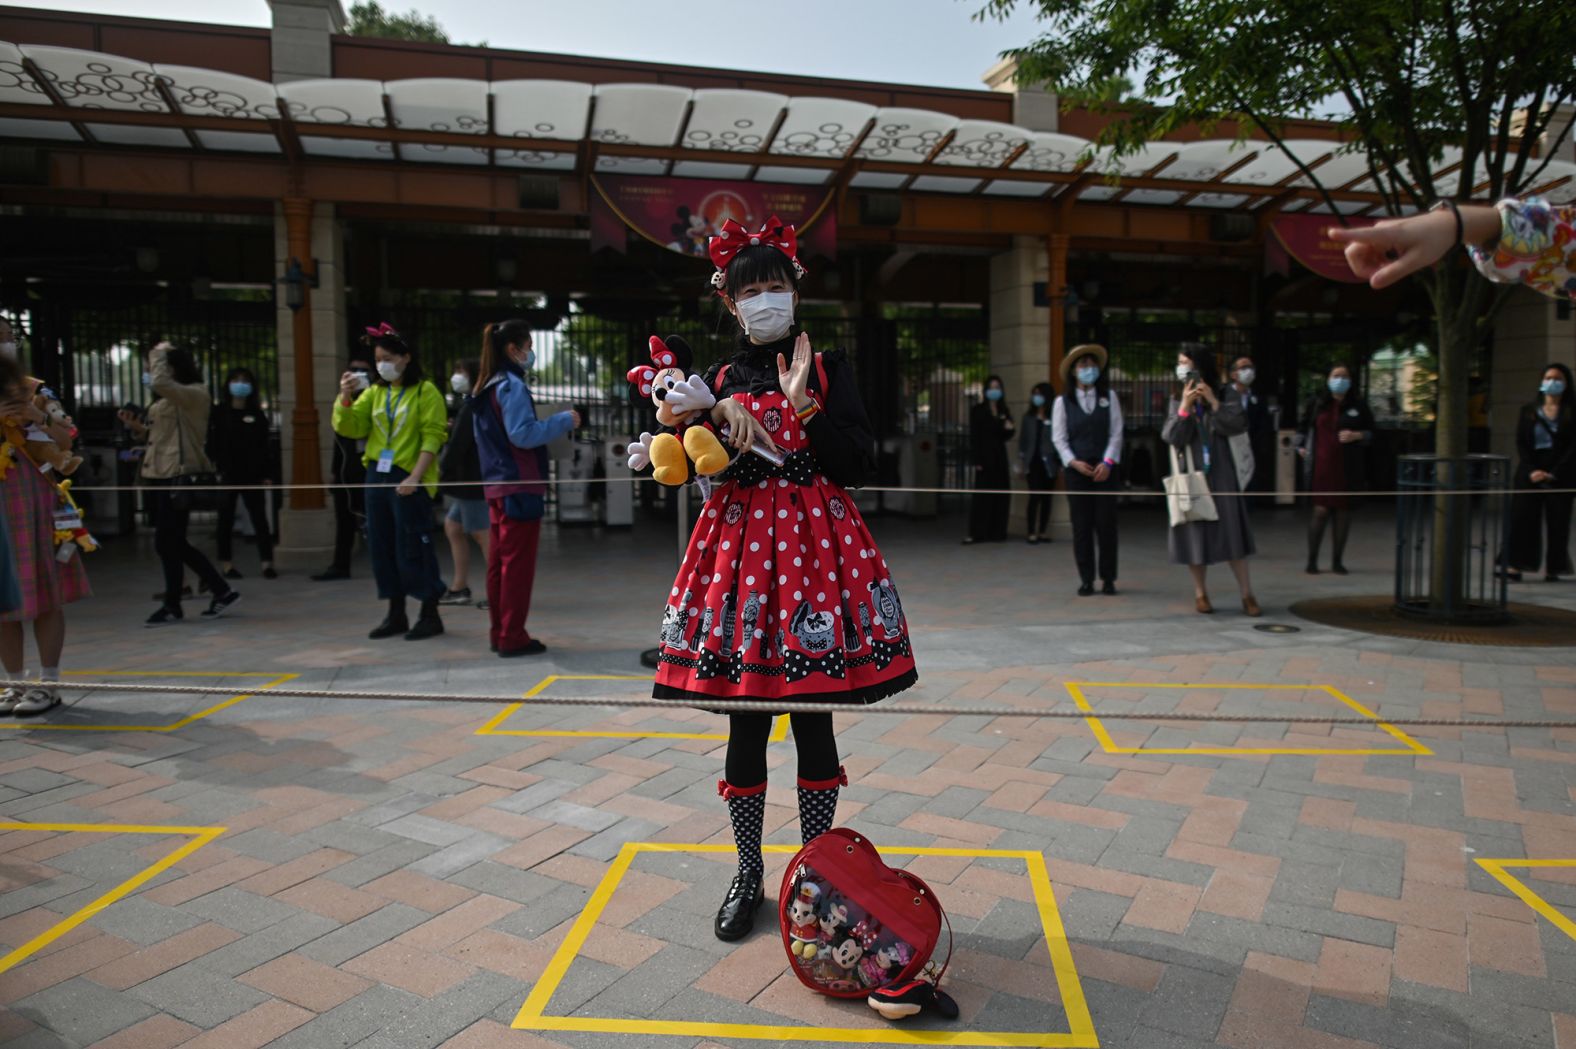 A woman stands on a designated spot to maintain distance while waiting to enter the Disneyland amusement park in Shanghai, China, on May 11. <a href="http://www.cnn.com/travel/article/shanghai-disneyland-reopens-intl-hnk/index.html" target="_blank">The park had been closed</a> for three and a half months. Visitors are now required to wear masks, have their temperatures taken and practice social distancing.